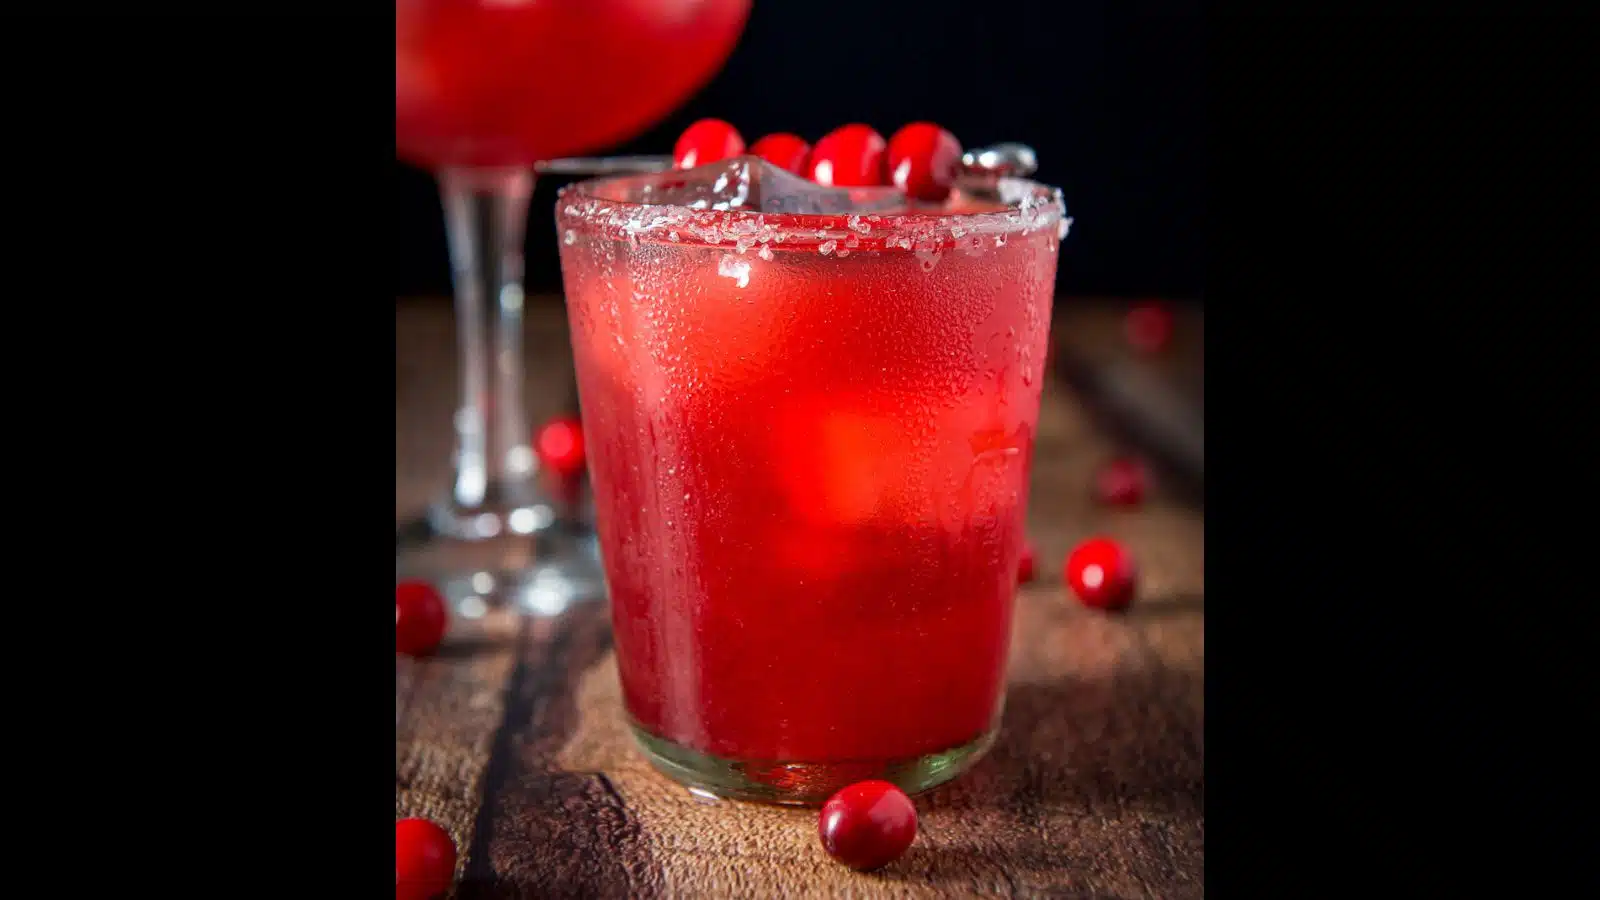 A double old fashioned glass filled with the cranberry drink with cranberries on the table and as garnish